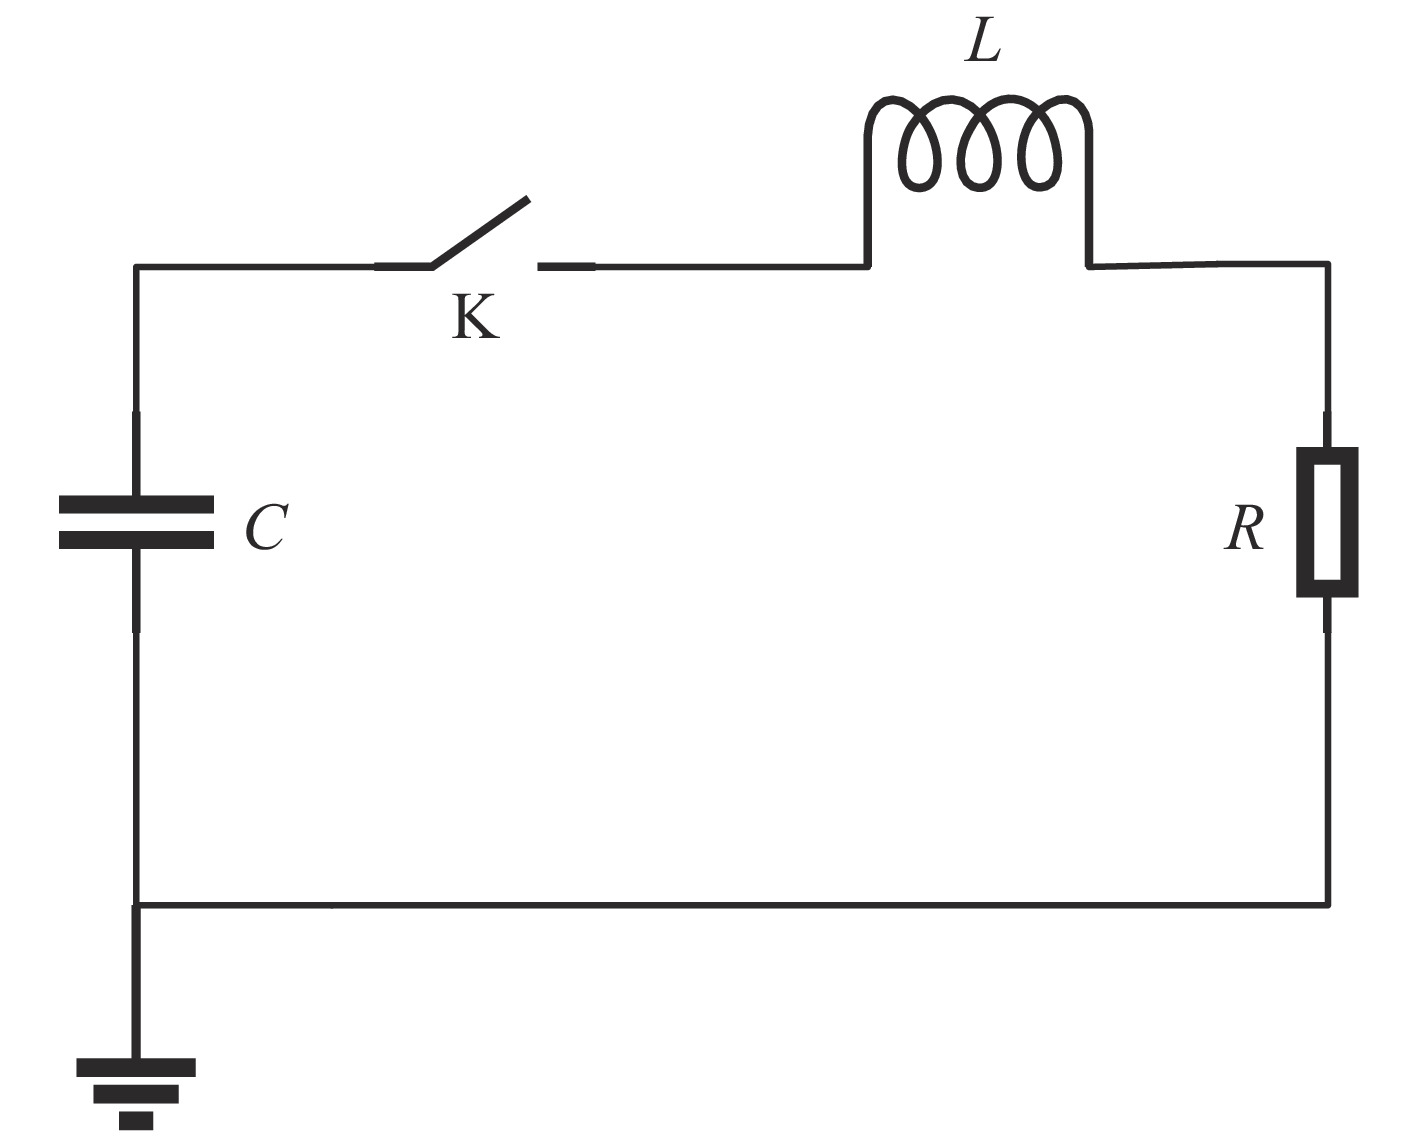 Schematic diagram of the pulse source